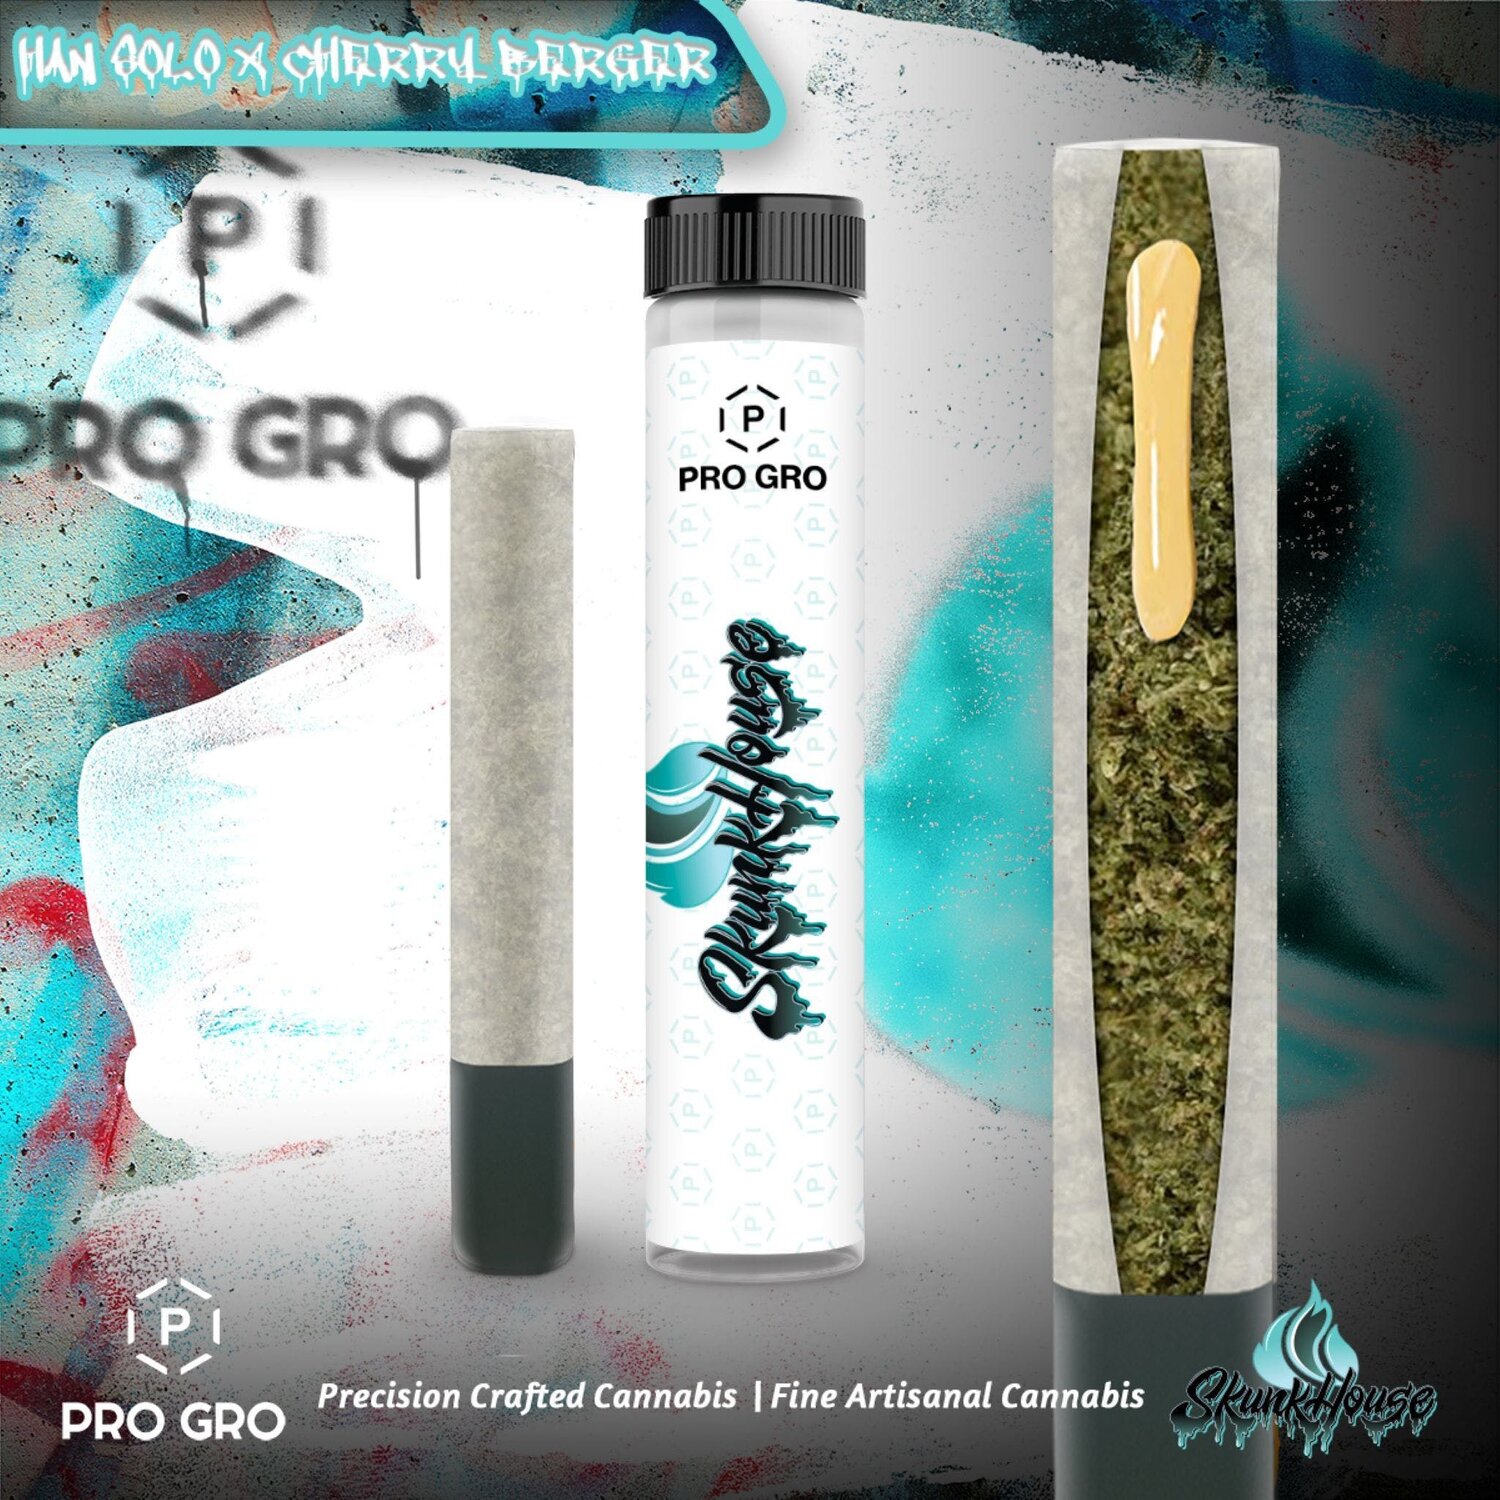 If you’re looking to take things up a notch for your movie marathon, try Skunk House Genetics x ProGro’s Han Solo Burger hash hole joints, which boast a whopping 2 grams of cannabis and a hash rosin center.